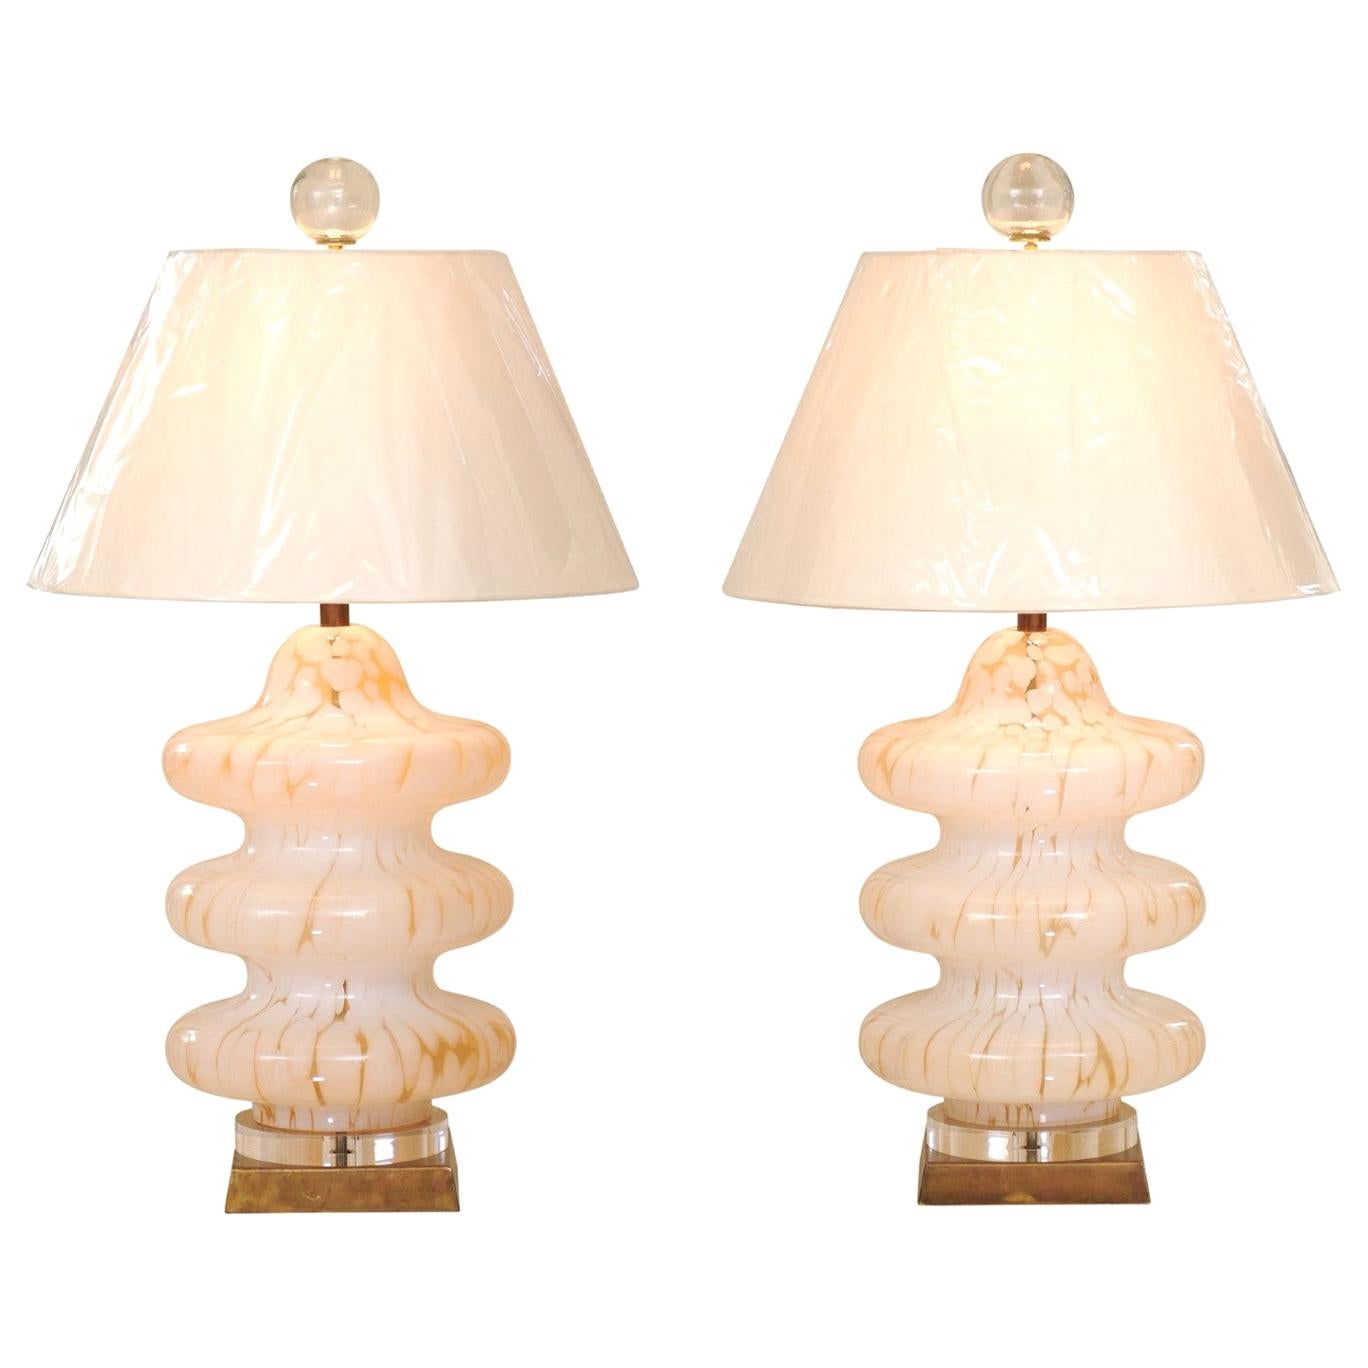 Exquisite Restored Amber Accent Blown Glass Pagoda Murano Lamps by Mazzega